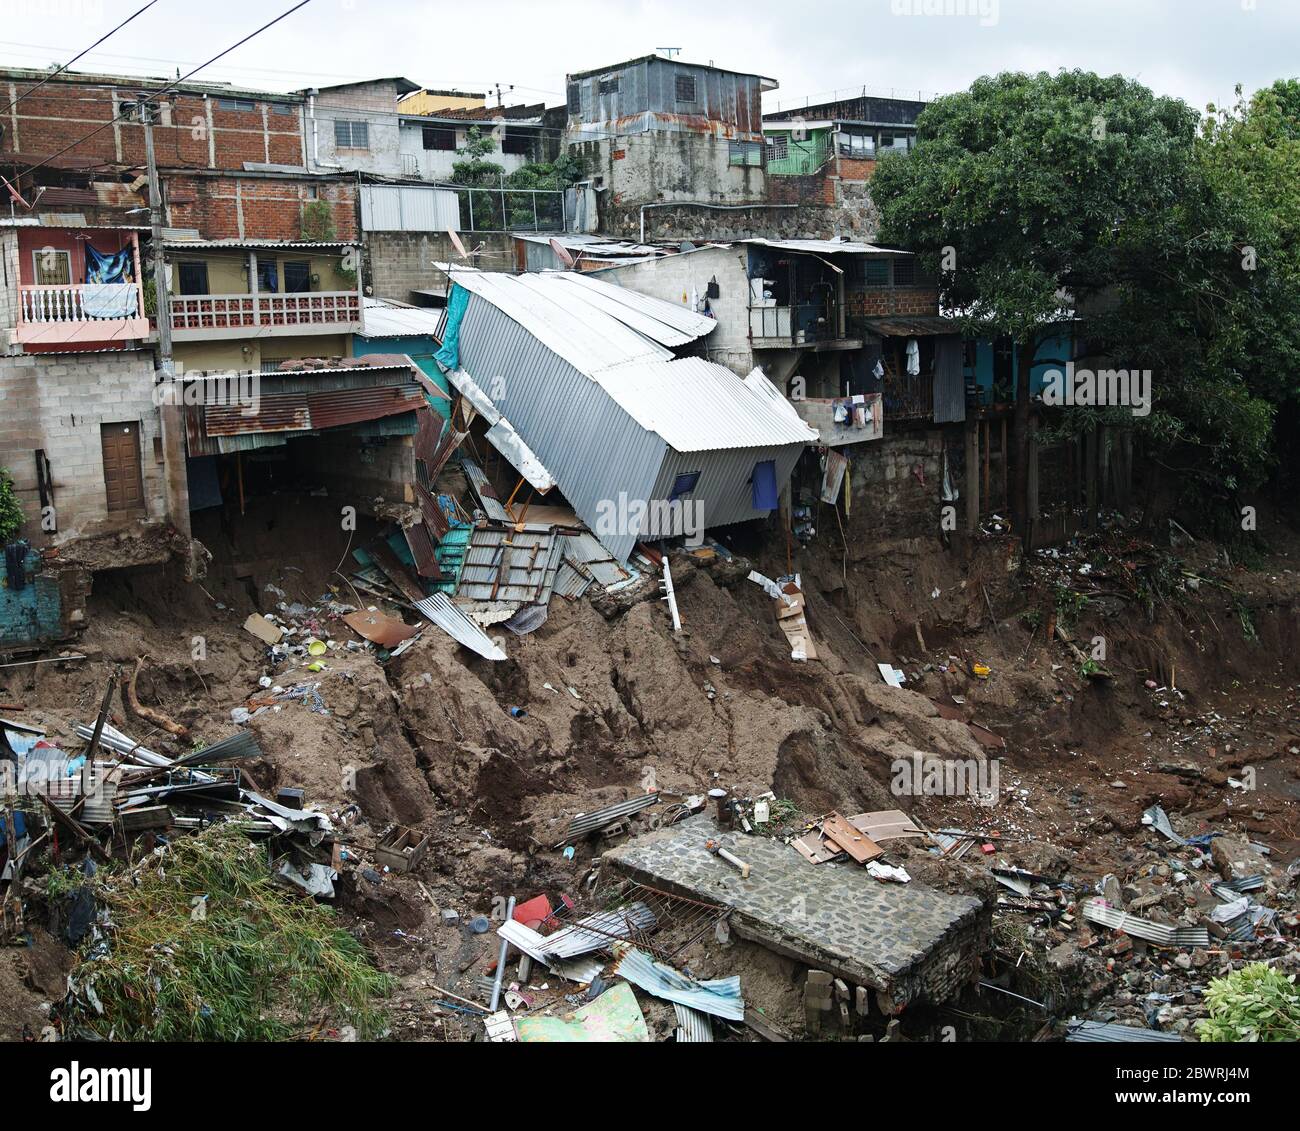 San Salvador, El Salvador. 2nd June, 2020. Damage caused by Tropical Storm  Amanda in Nuevo Israel Community in the capital of El Salvador. The  community is located on the banks of the